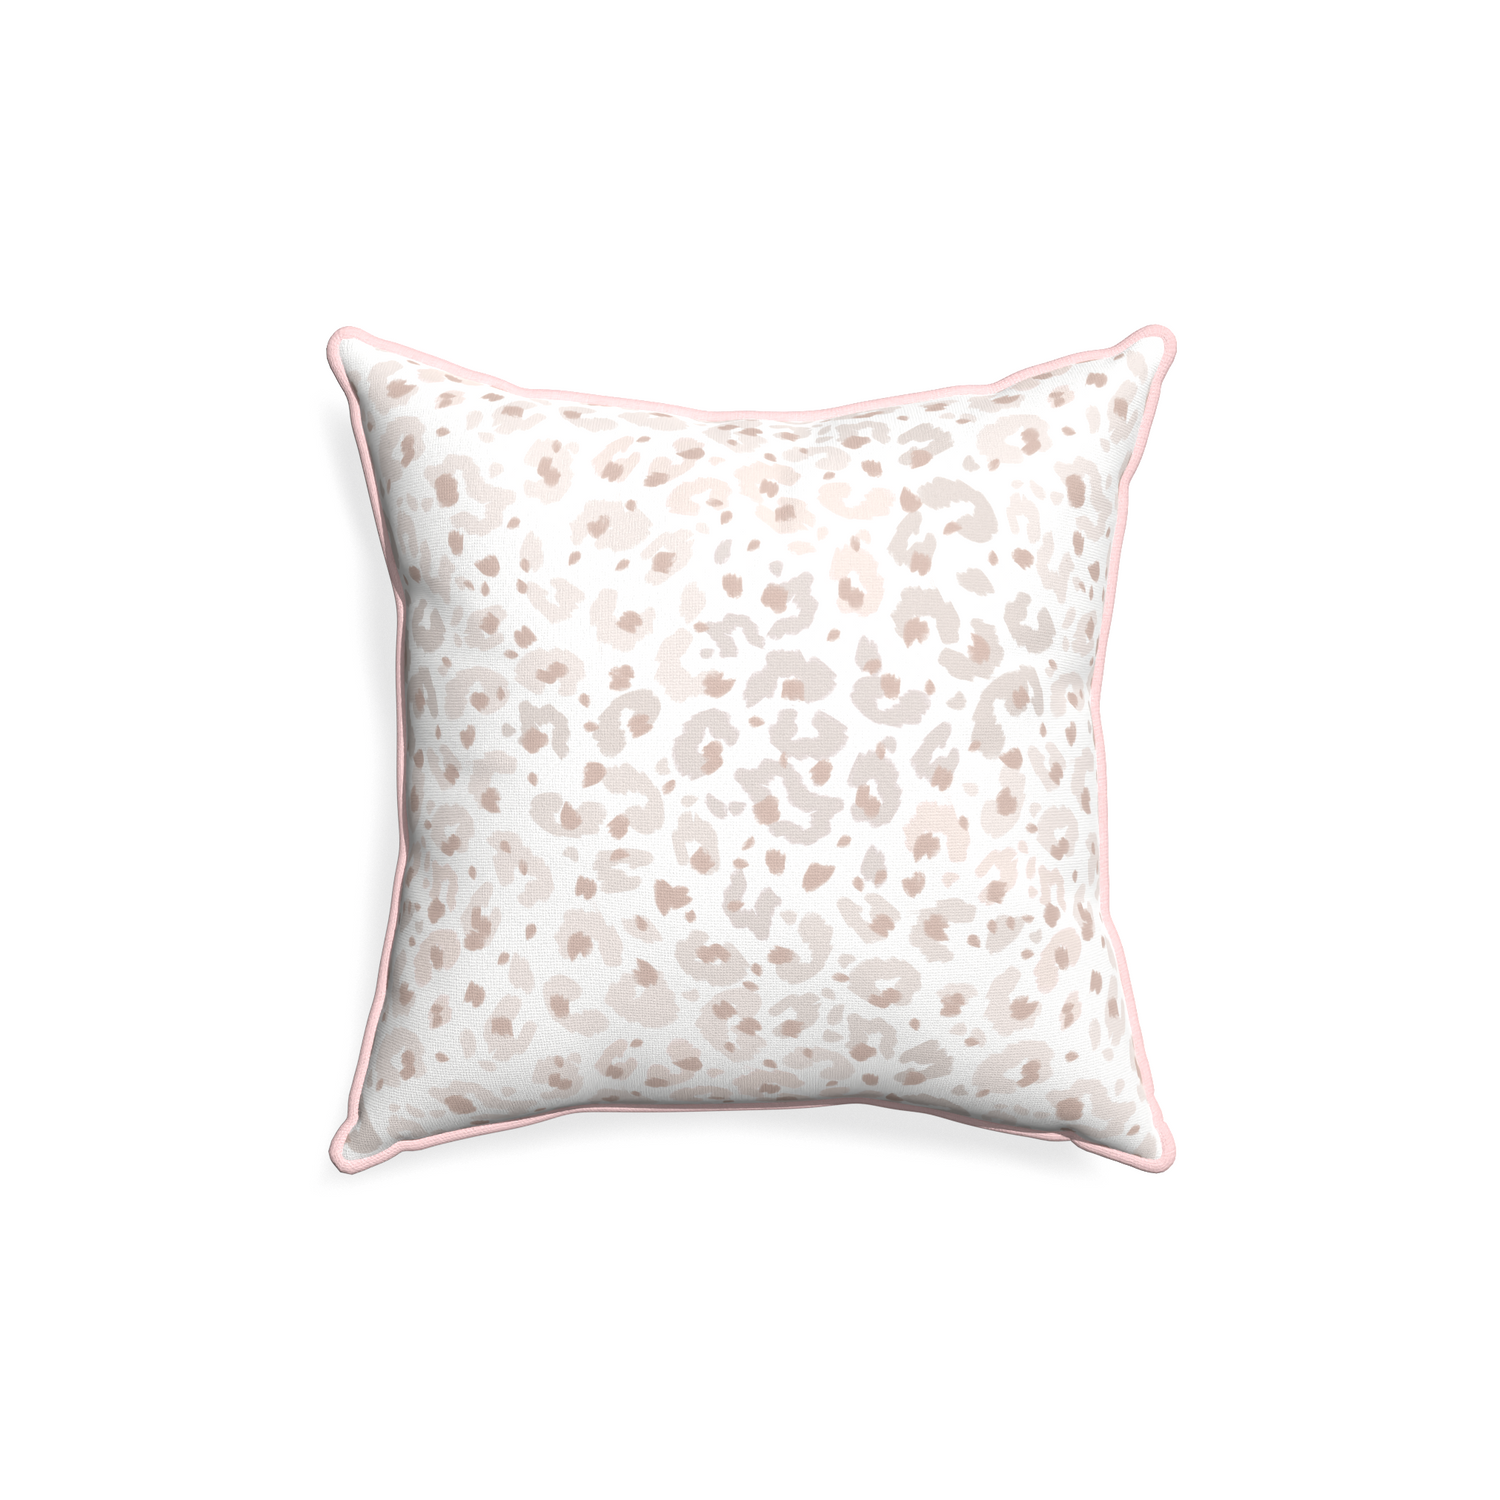 18-square rosie custom beige animal printpillow with petal piping on white background